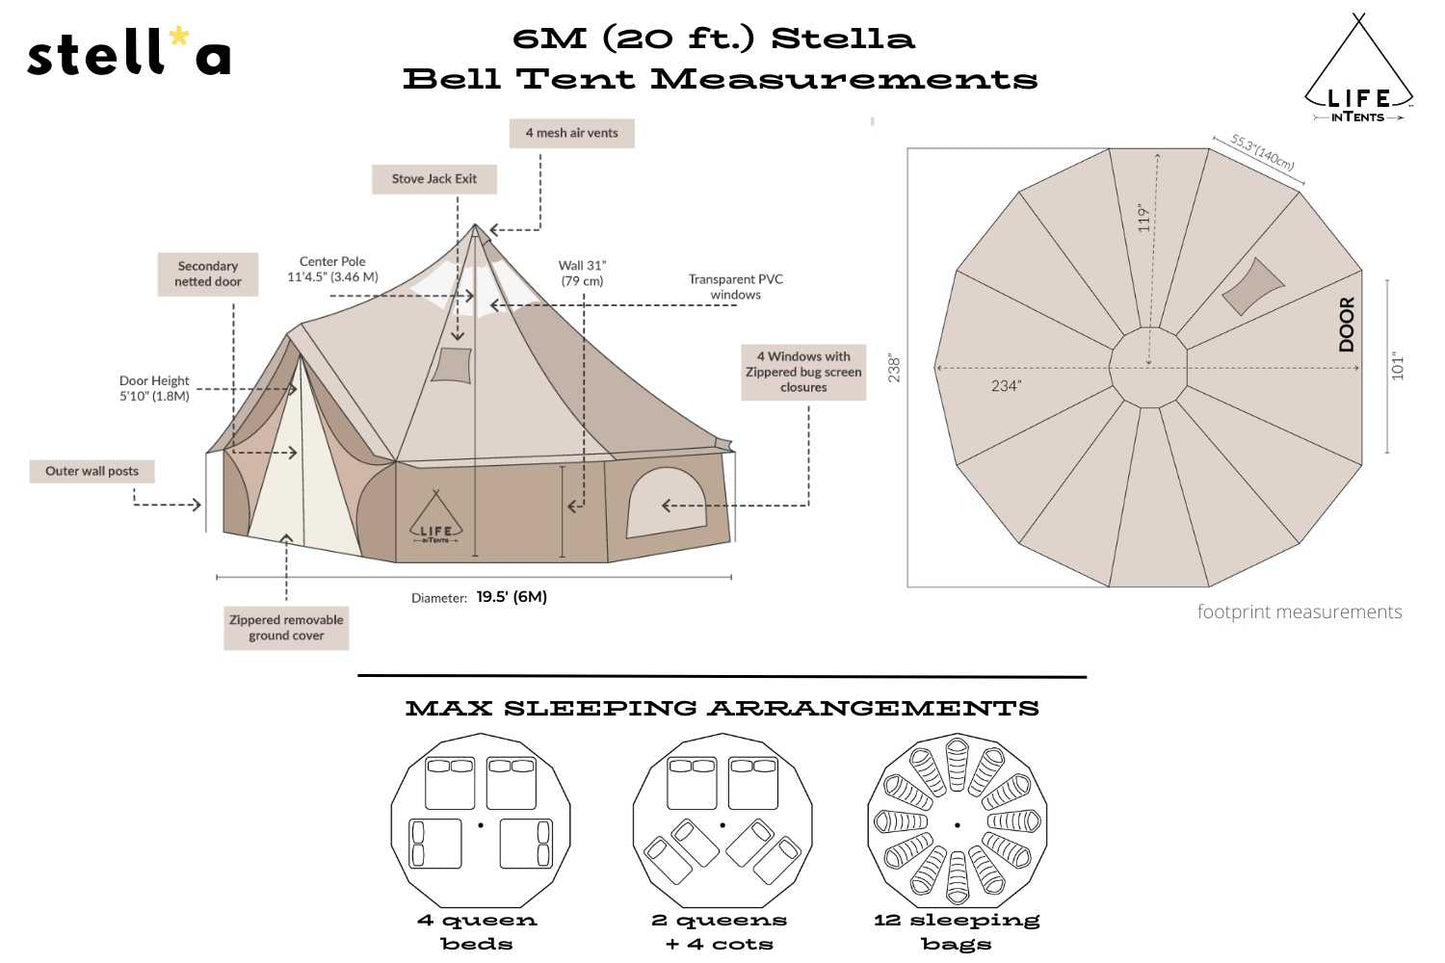 Life inTents Canvas Tent Life inTents Stella™ Stargazing 360 View Canvas Bell Tent 20' (6 Meters)